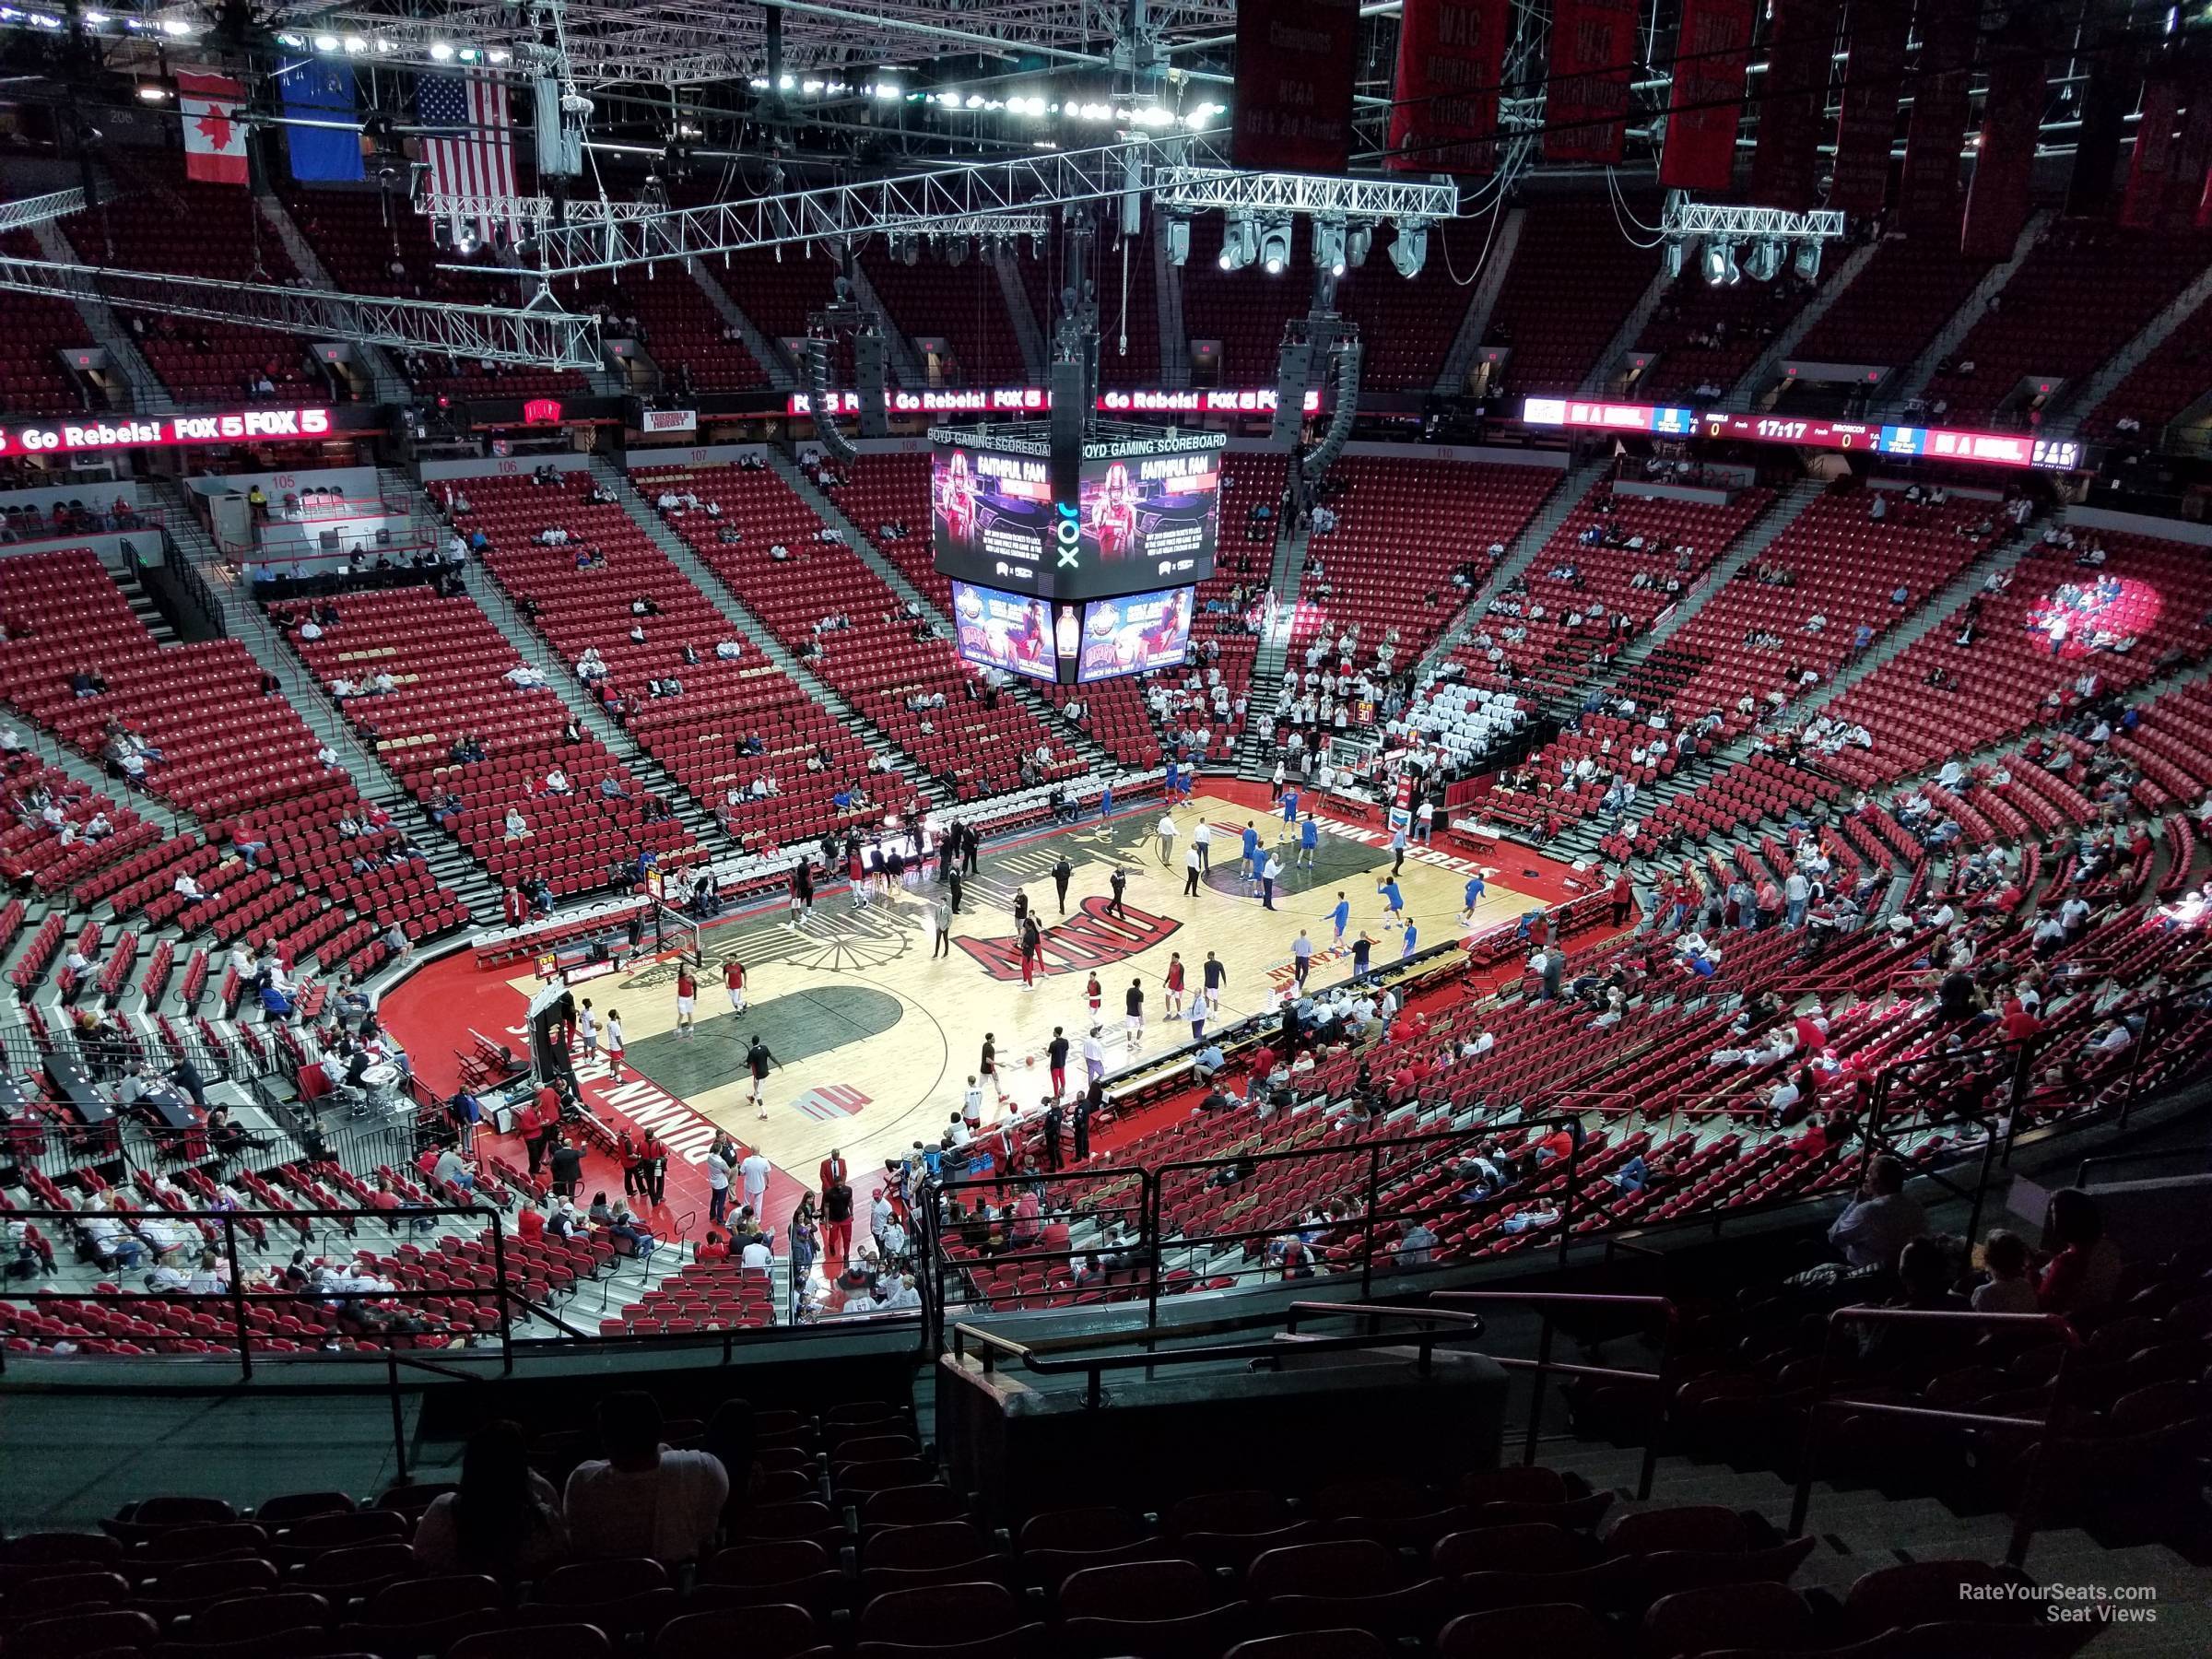 section 231, row l seat view  - thomas and mack center